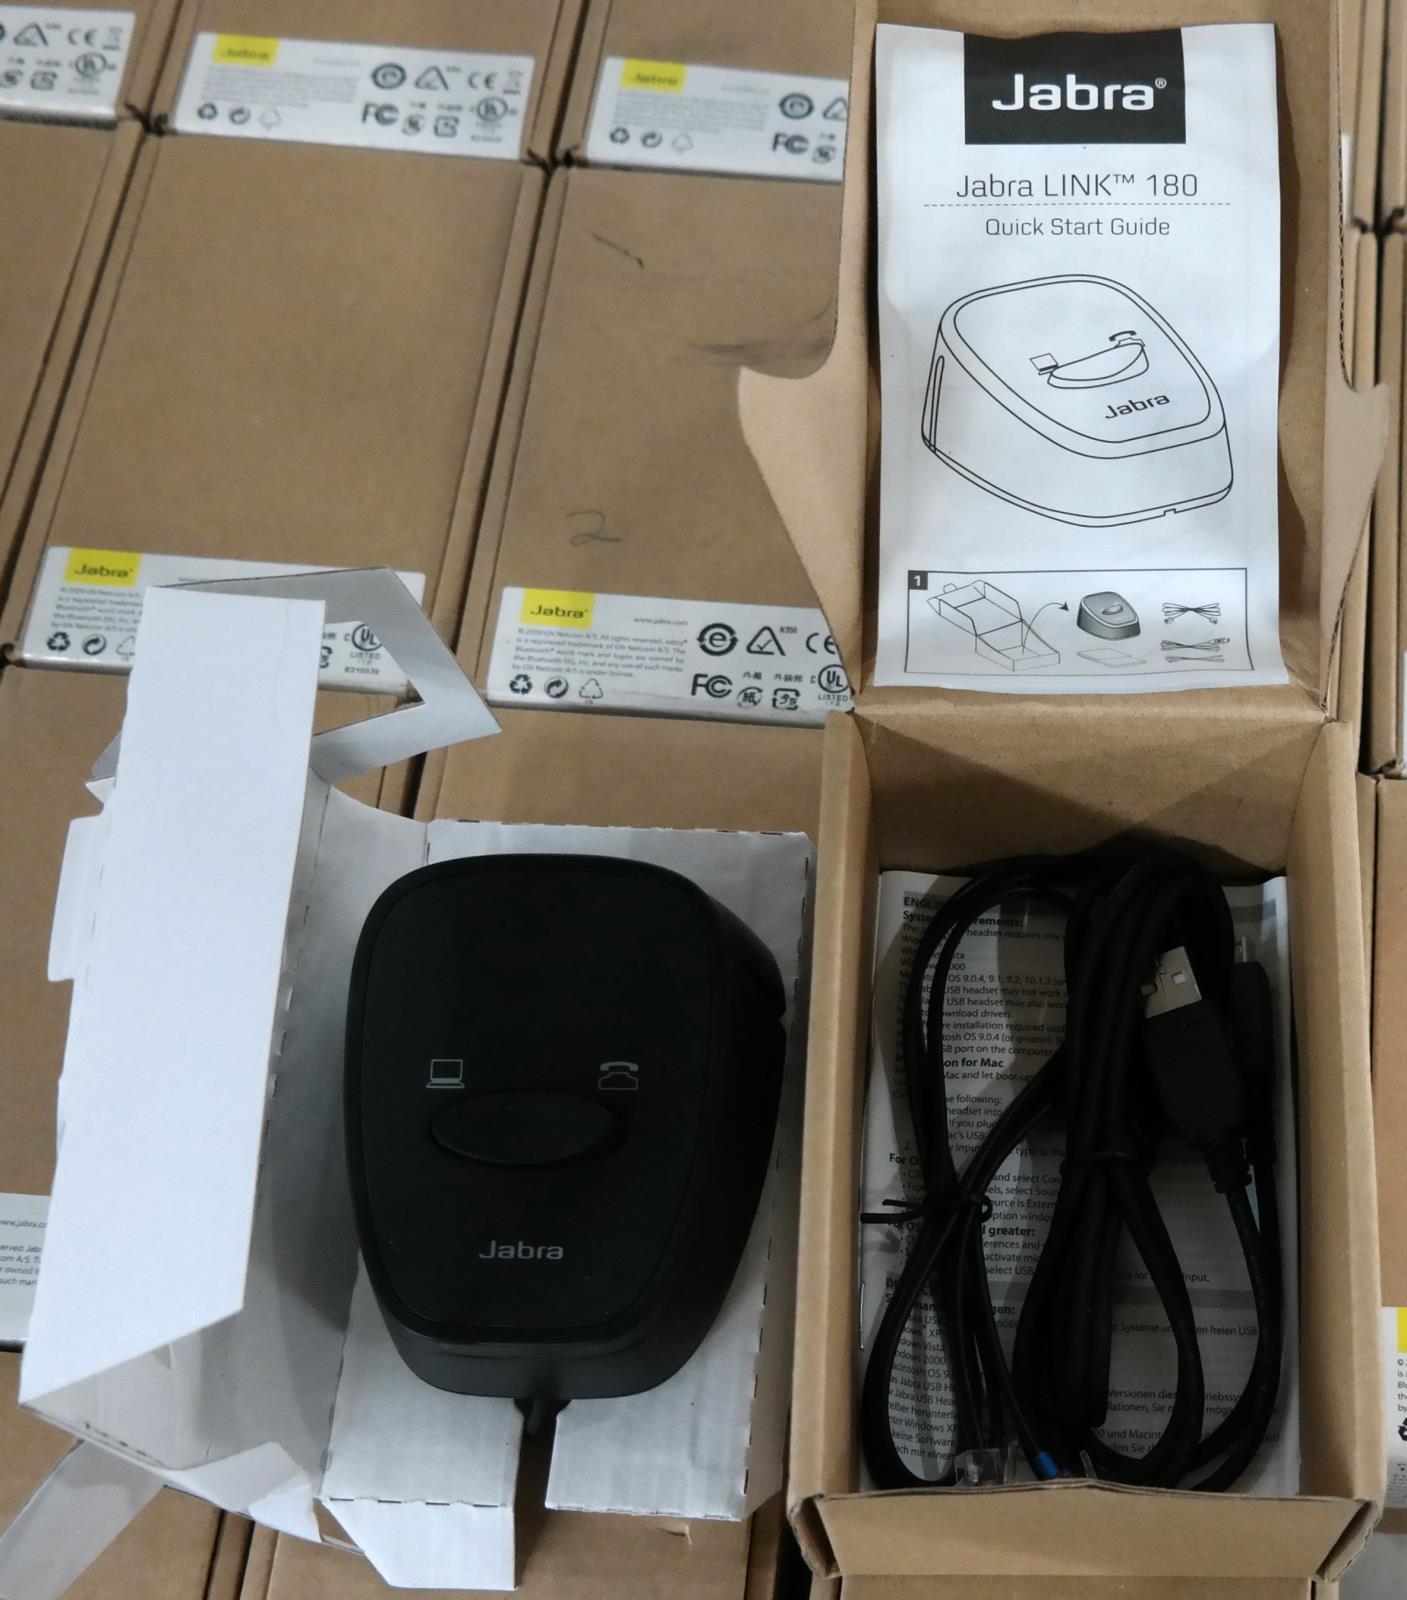 Lot 40 Jabra Link 180 Deskphone and PC USB Switch for GN Netcom Headset 180-09 